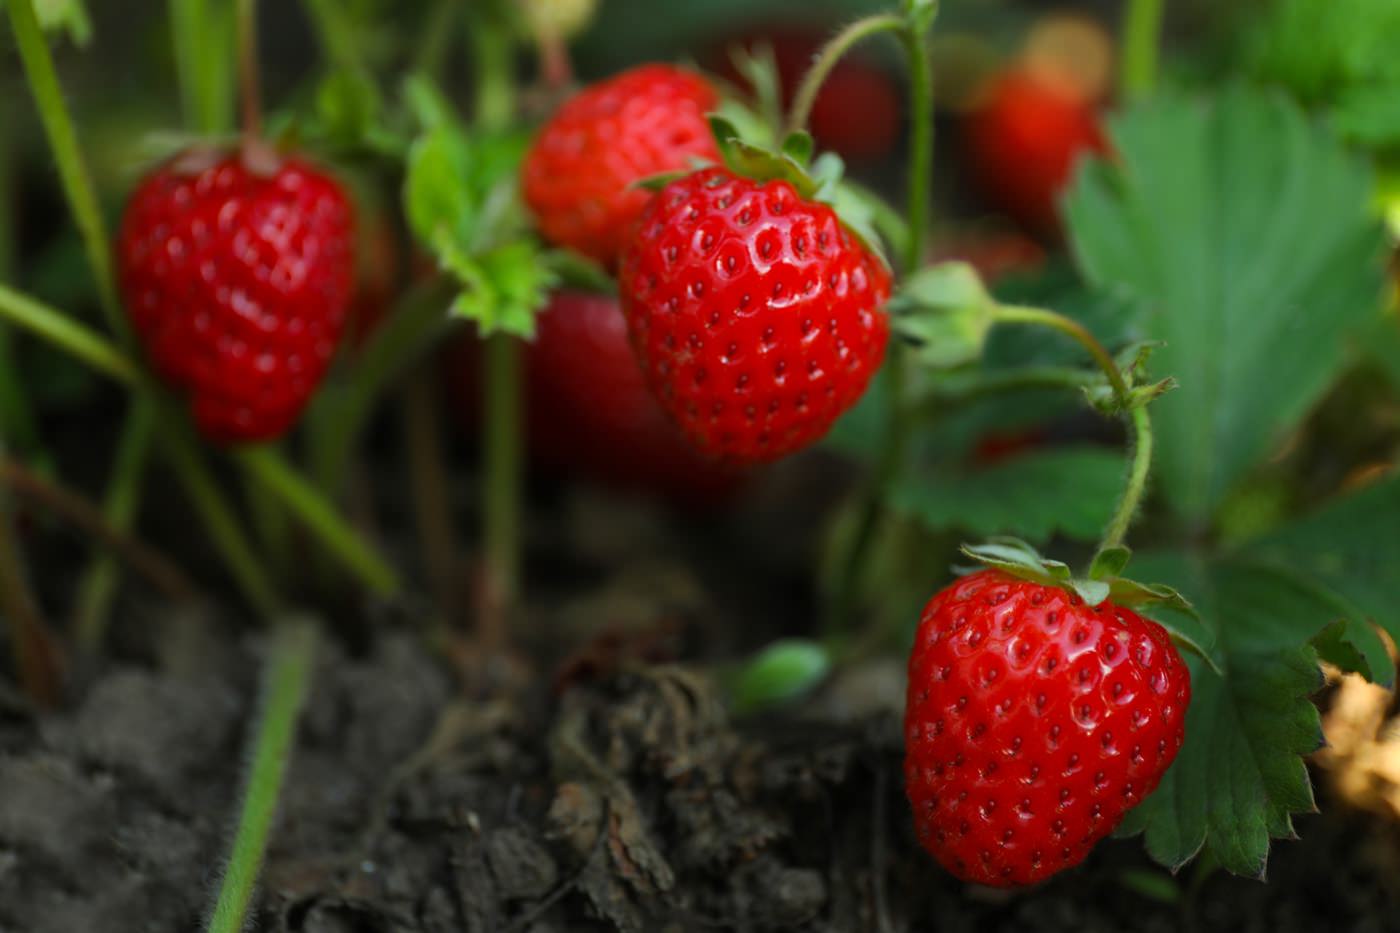 The Role of Pollination in the Lifecycle of a Strawberry